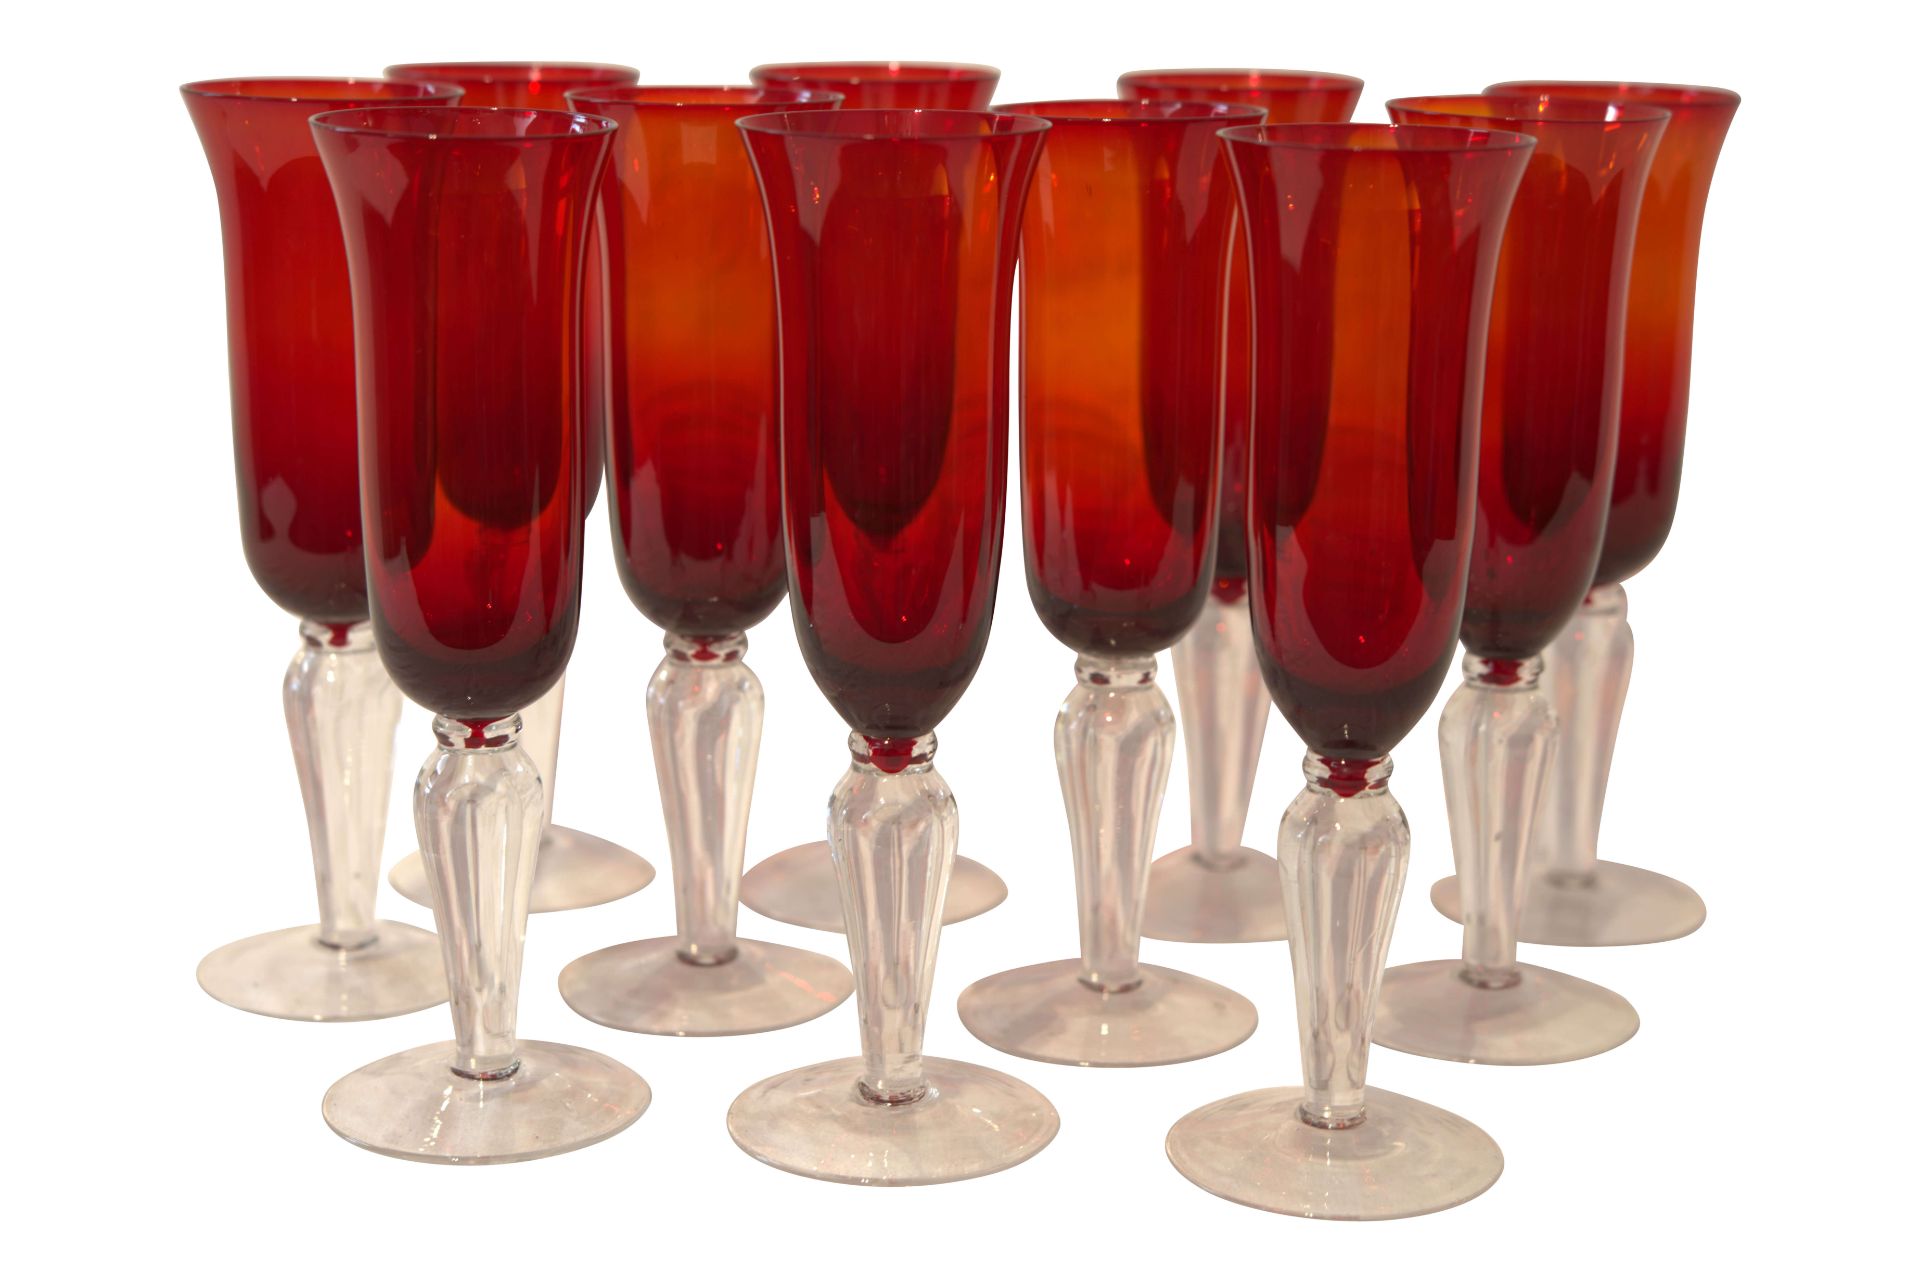 11 langstielige Gläser rotes und weißes Glas | 11 Long Stem Glasses Red and White Glass - Image 2 of 5